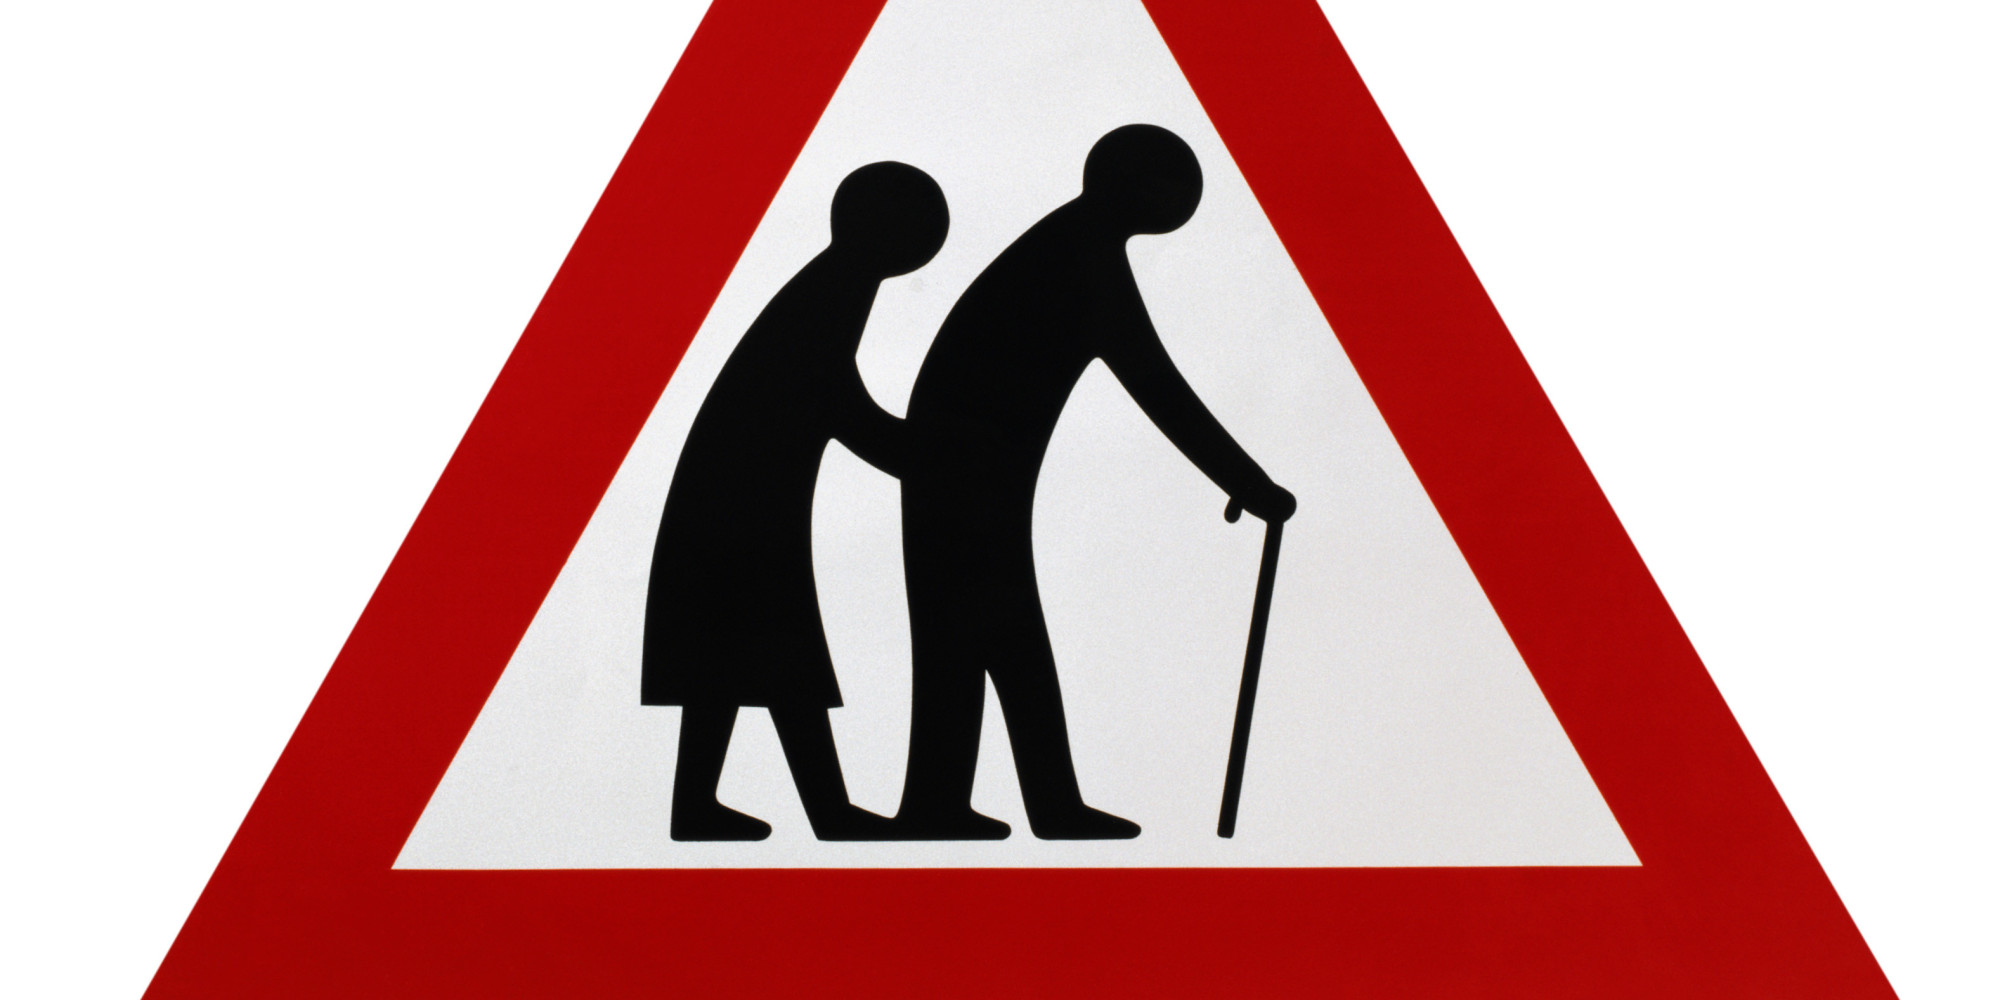 designers-hope-to-replace-the-much-hated-elderly-crossing-signs